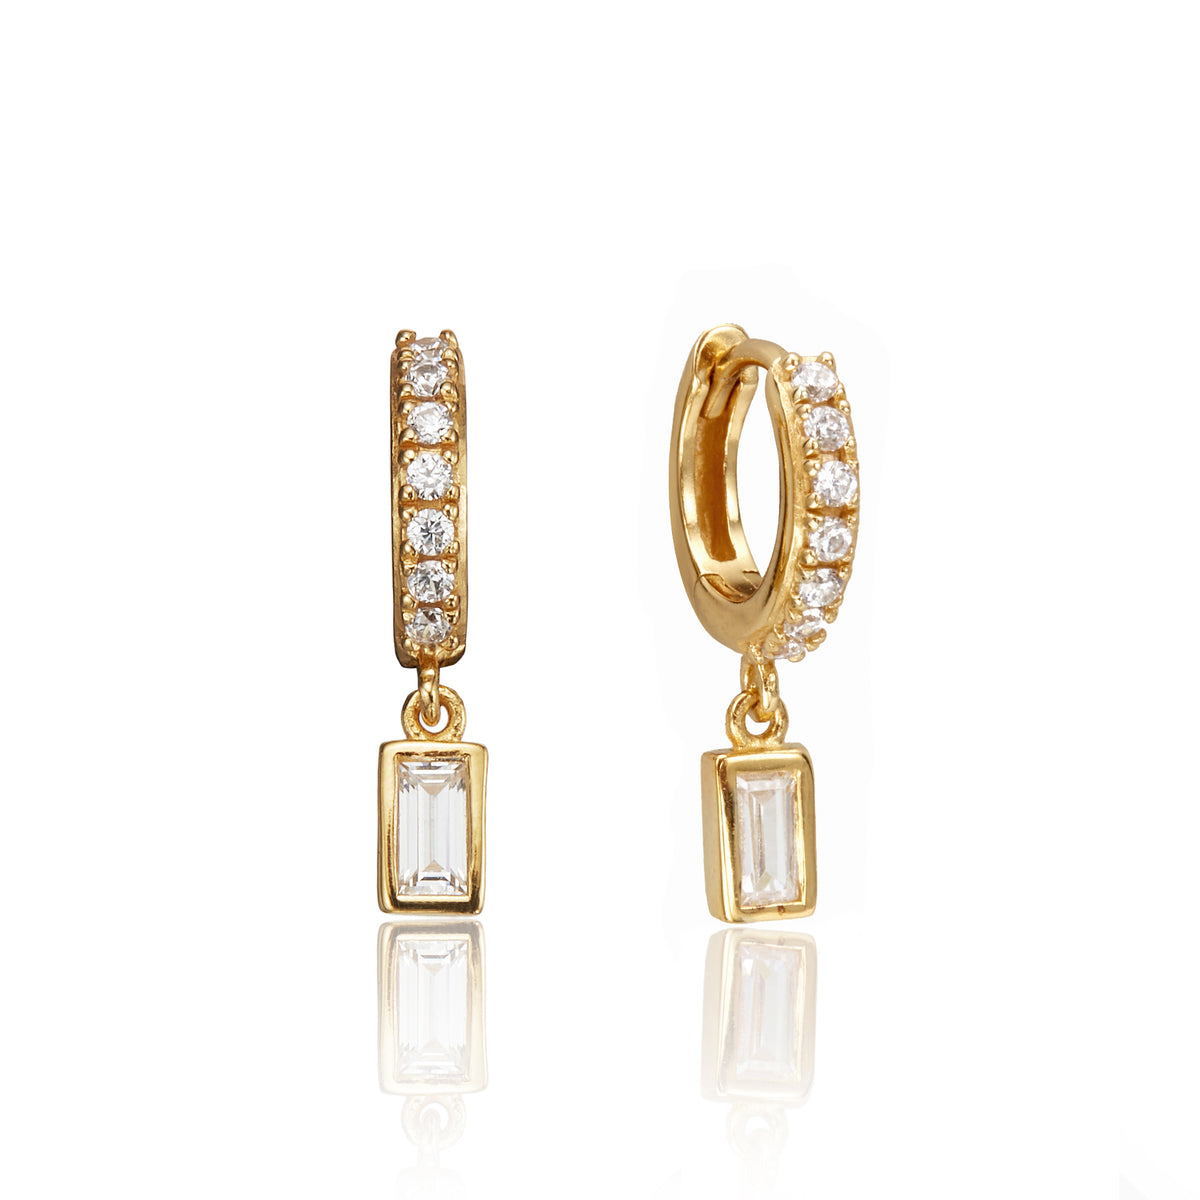 Small Solid Gold Diamond Huggie Hoop Earrings by Lily & Roo